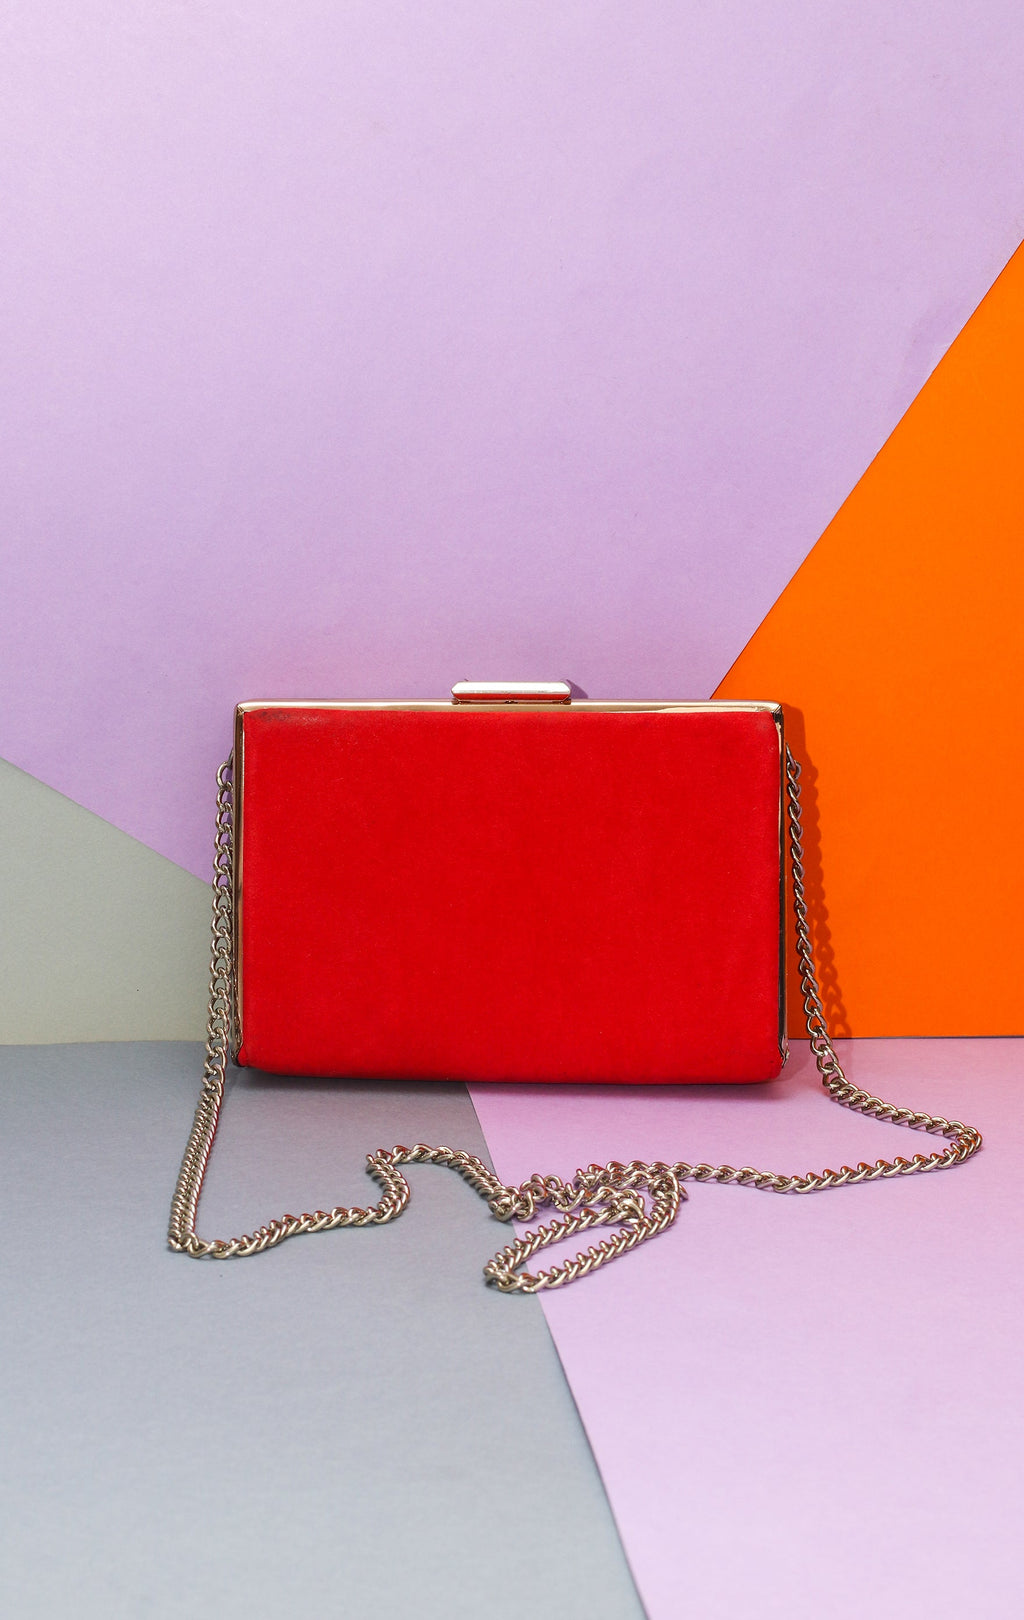 ZARA CLUTCH - Red faux suede with gold chain - 18 x 12 cm